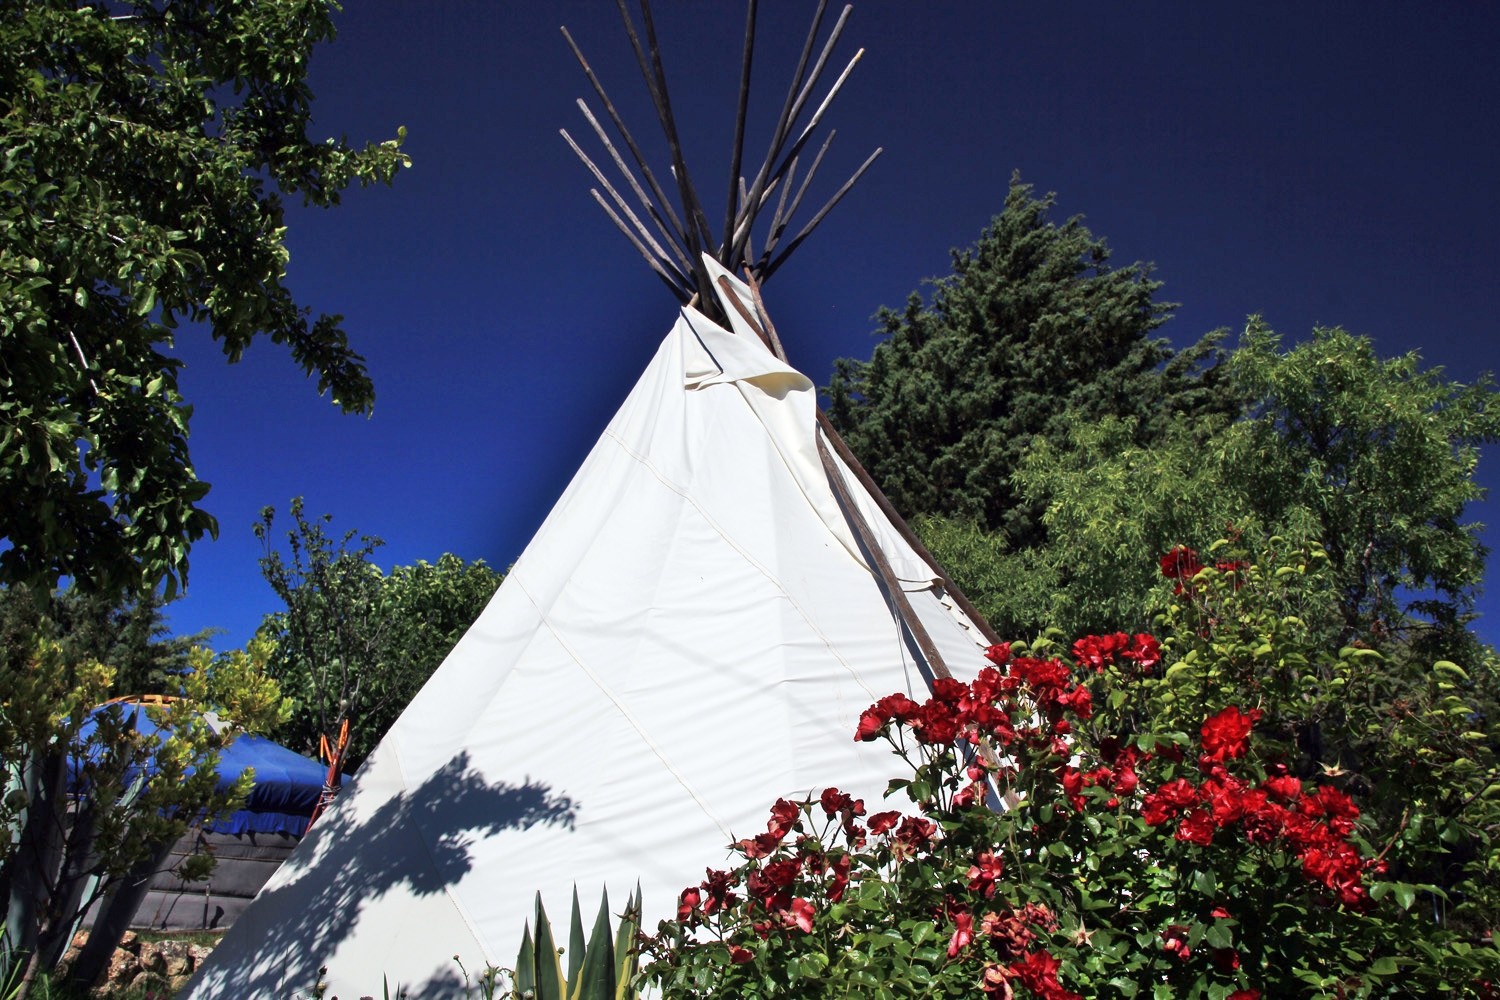 Detail of the Teepee